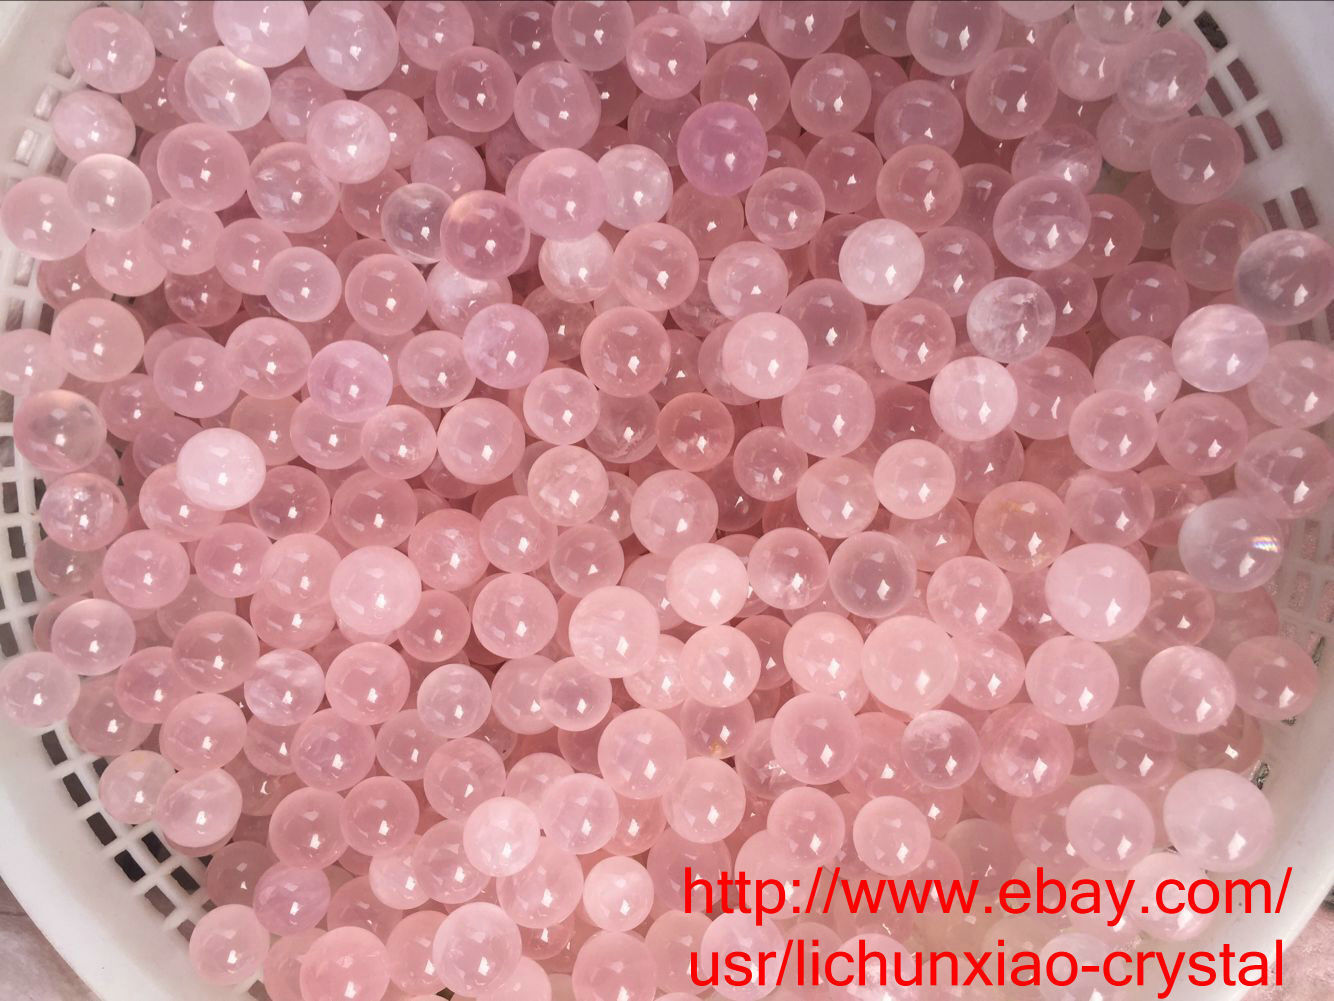 4.4lb wholesale Natural Mozambique ICY Rose Quartz Crystal Sphere Ball Healing